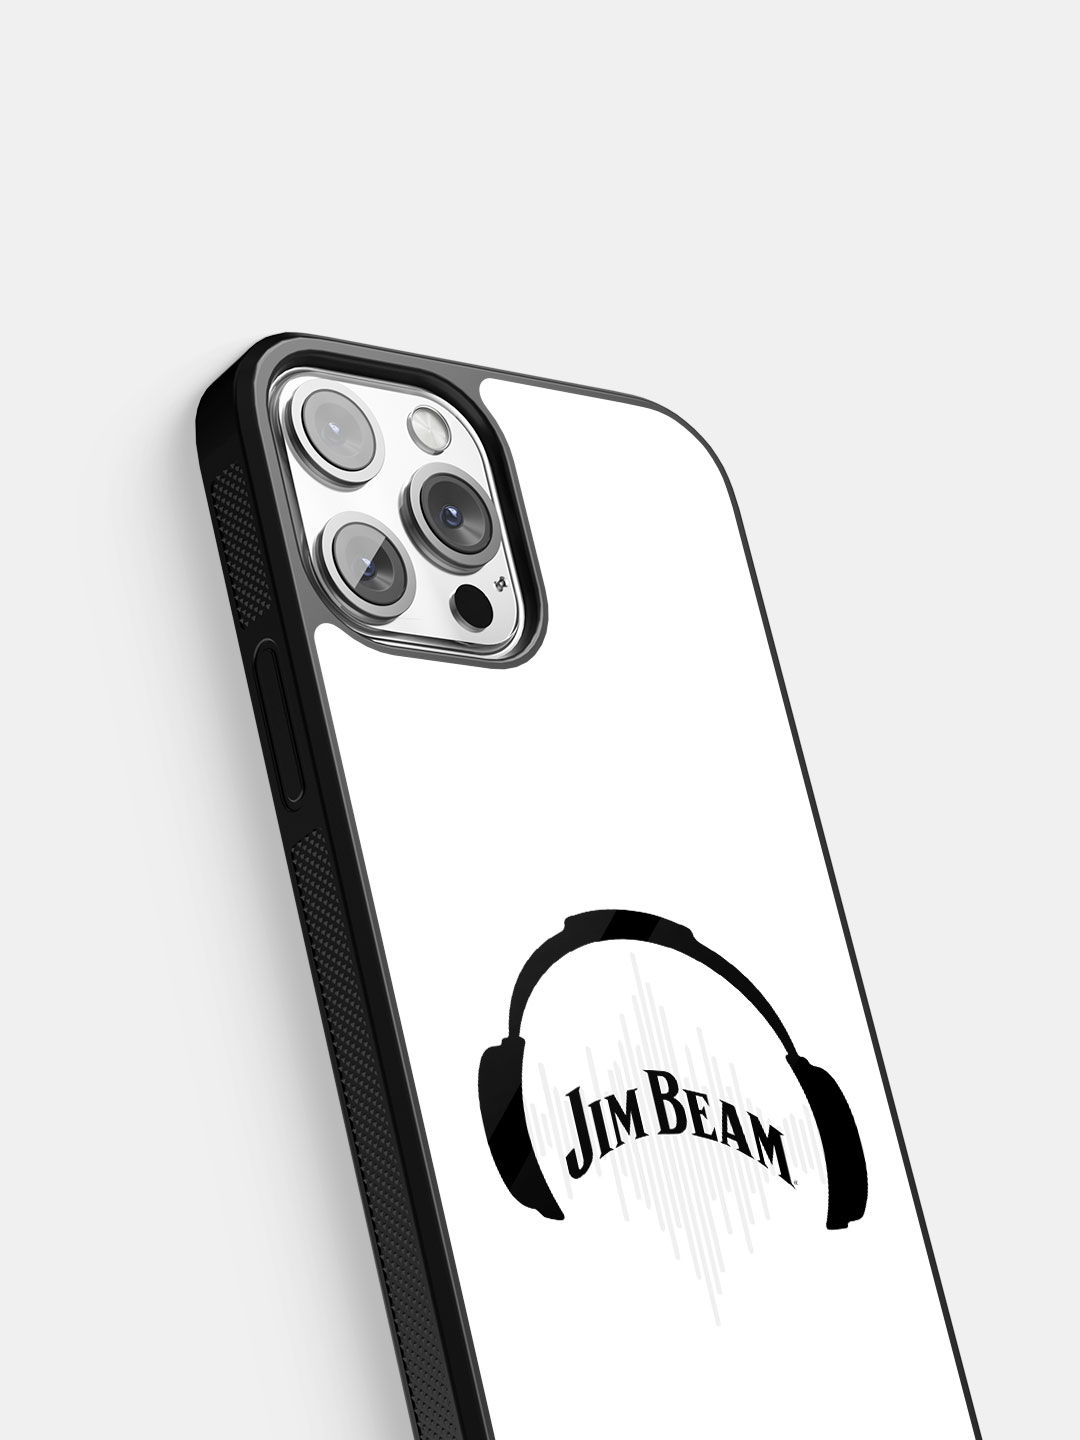 Jim Beam Solid Sound - Glass Case For iPhone 13 Pro Max